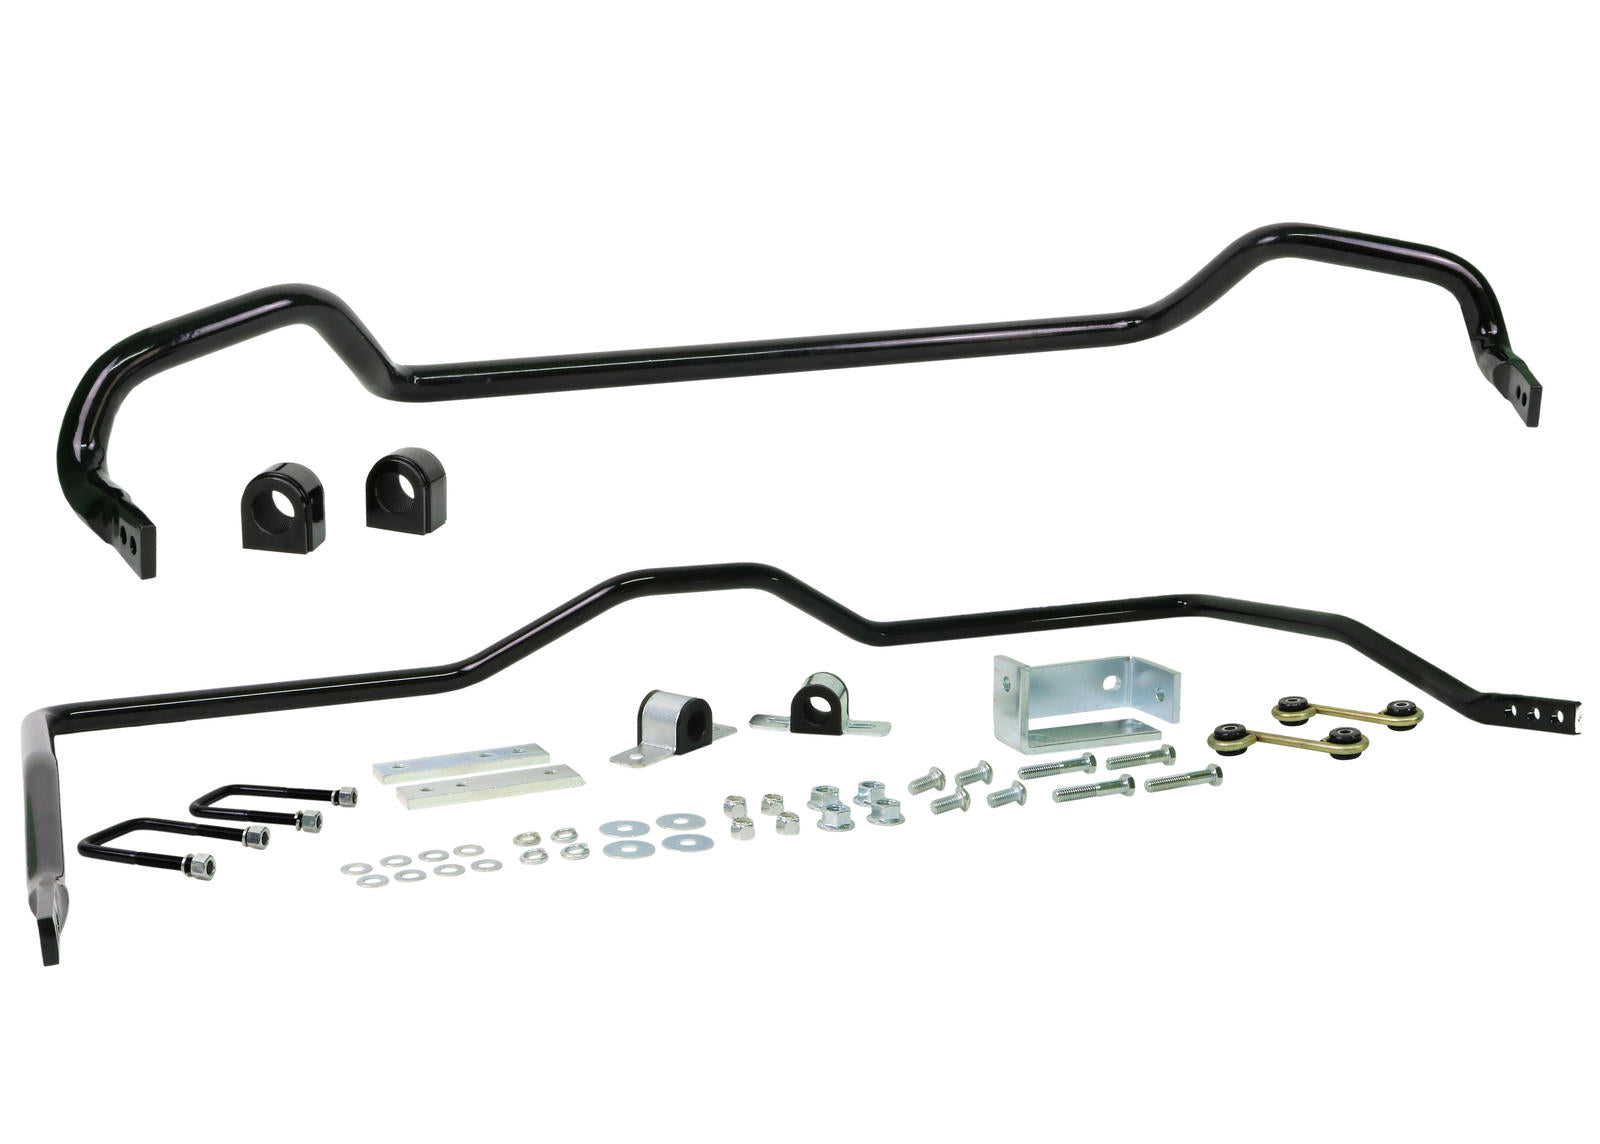 Front And Rear Sway Bar - Vehicle Kit To Suit Ford Ranger PXI, II And Mazda BT-50 UP, UR